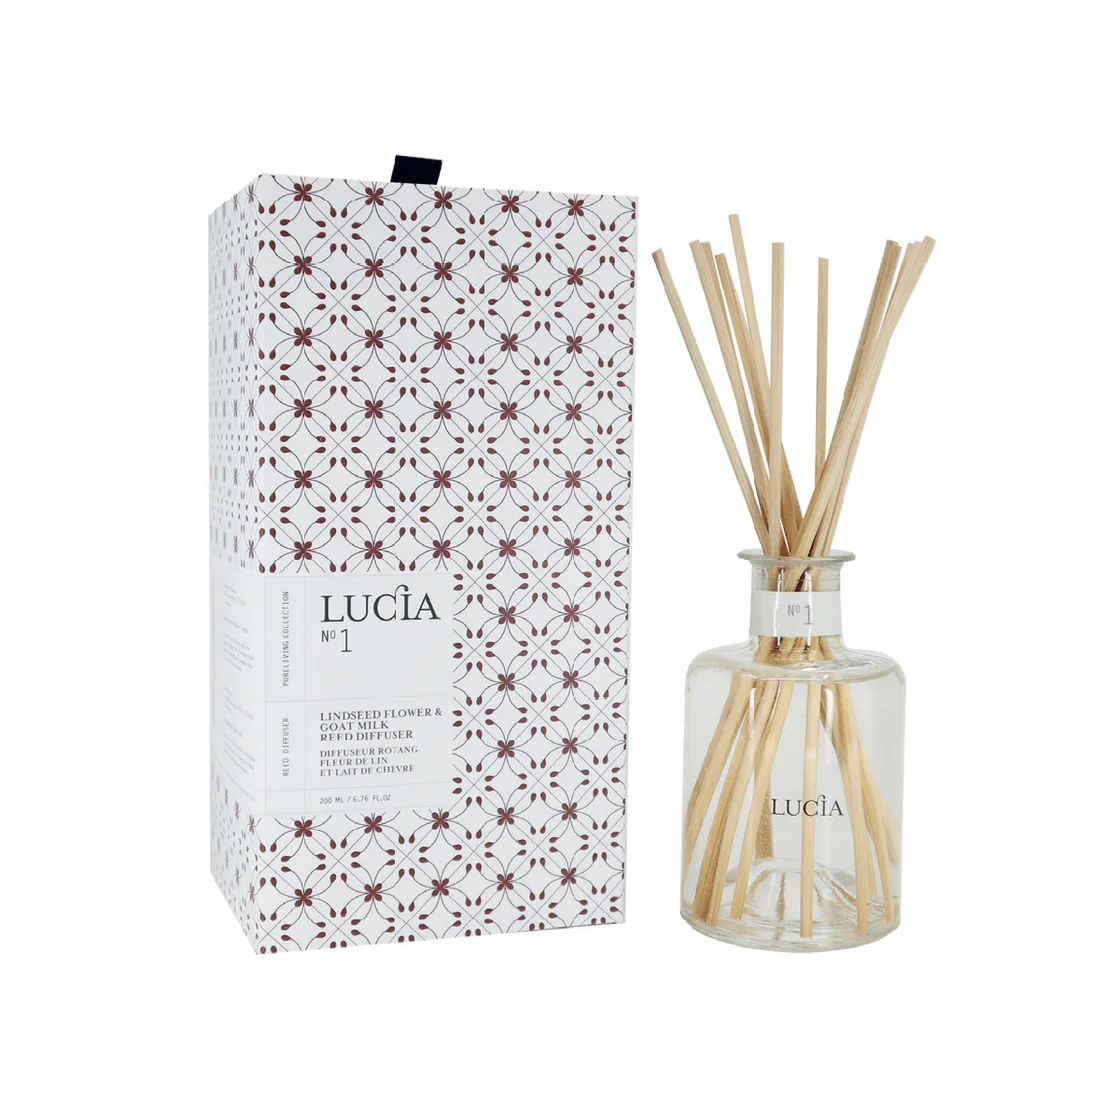 lucia linseed flower and goat milk reed diffuser